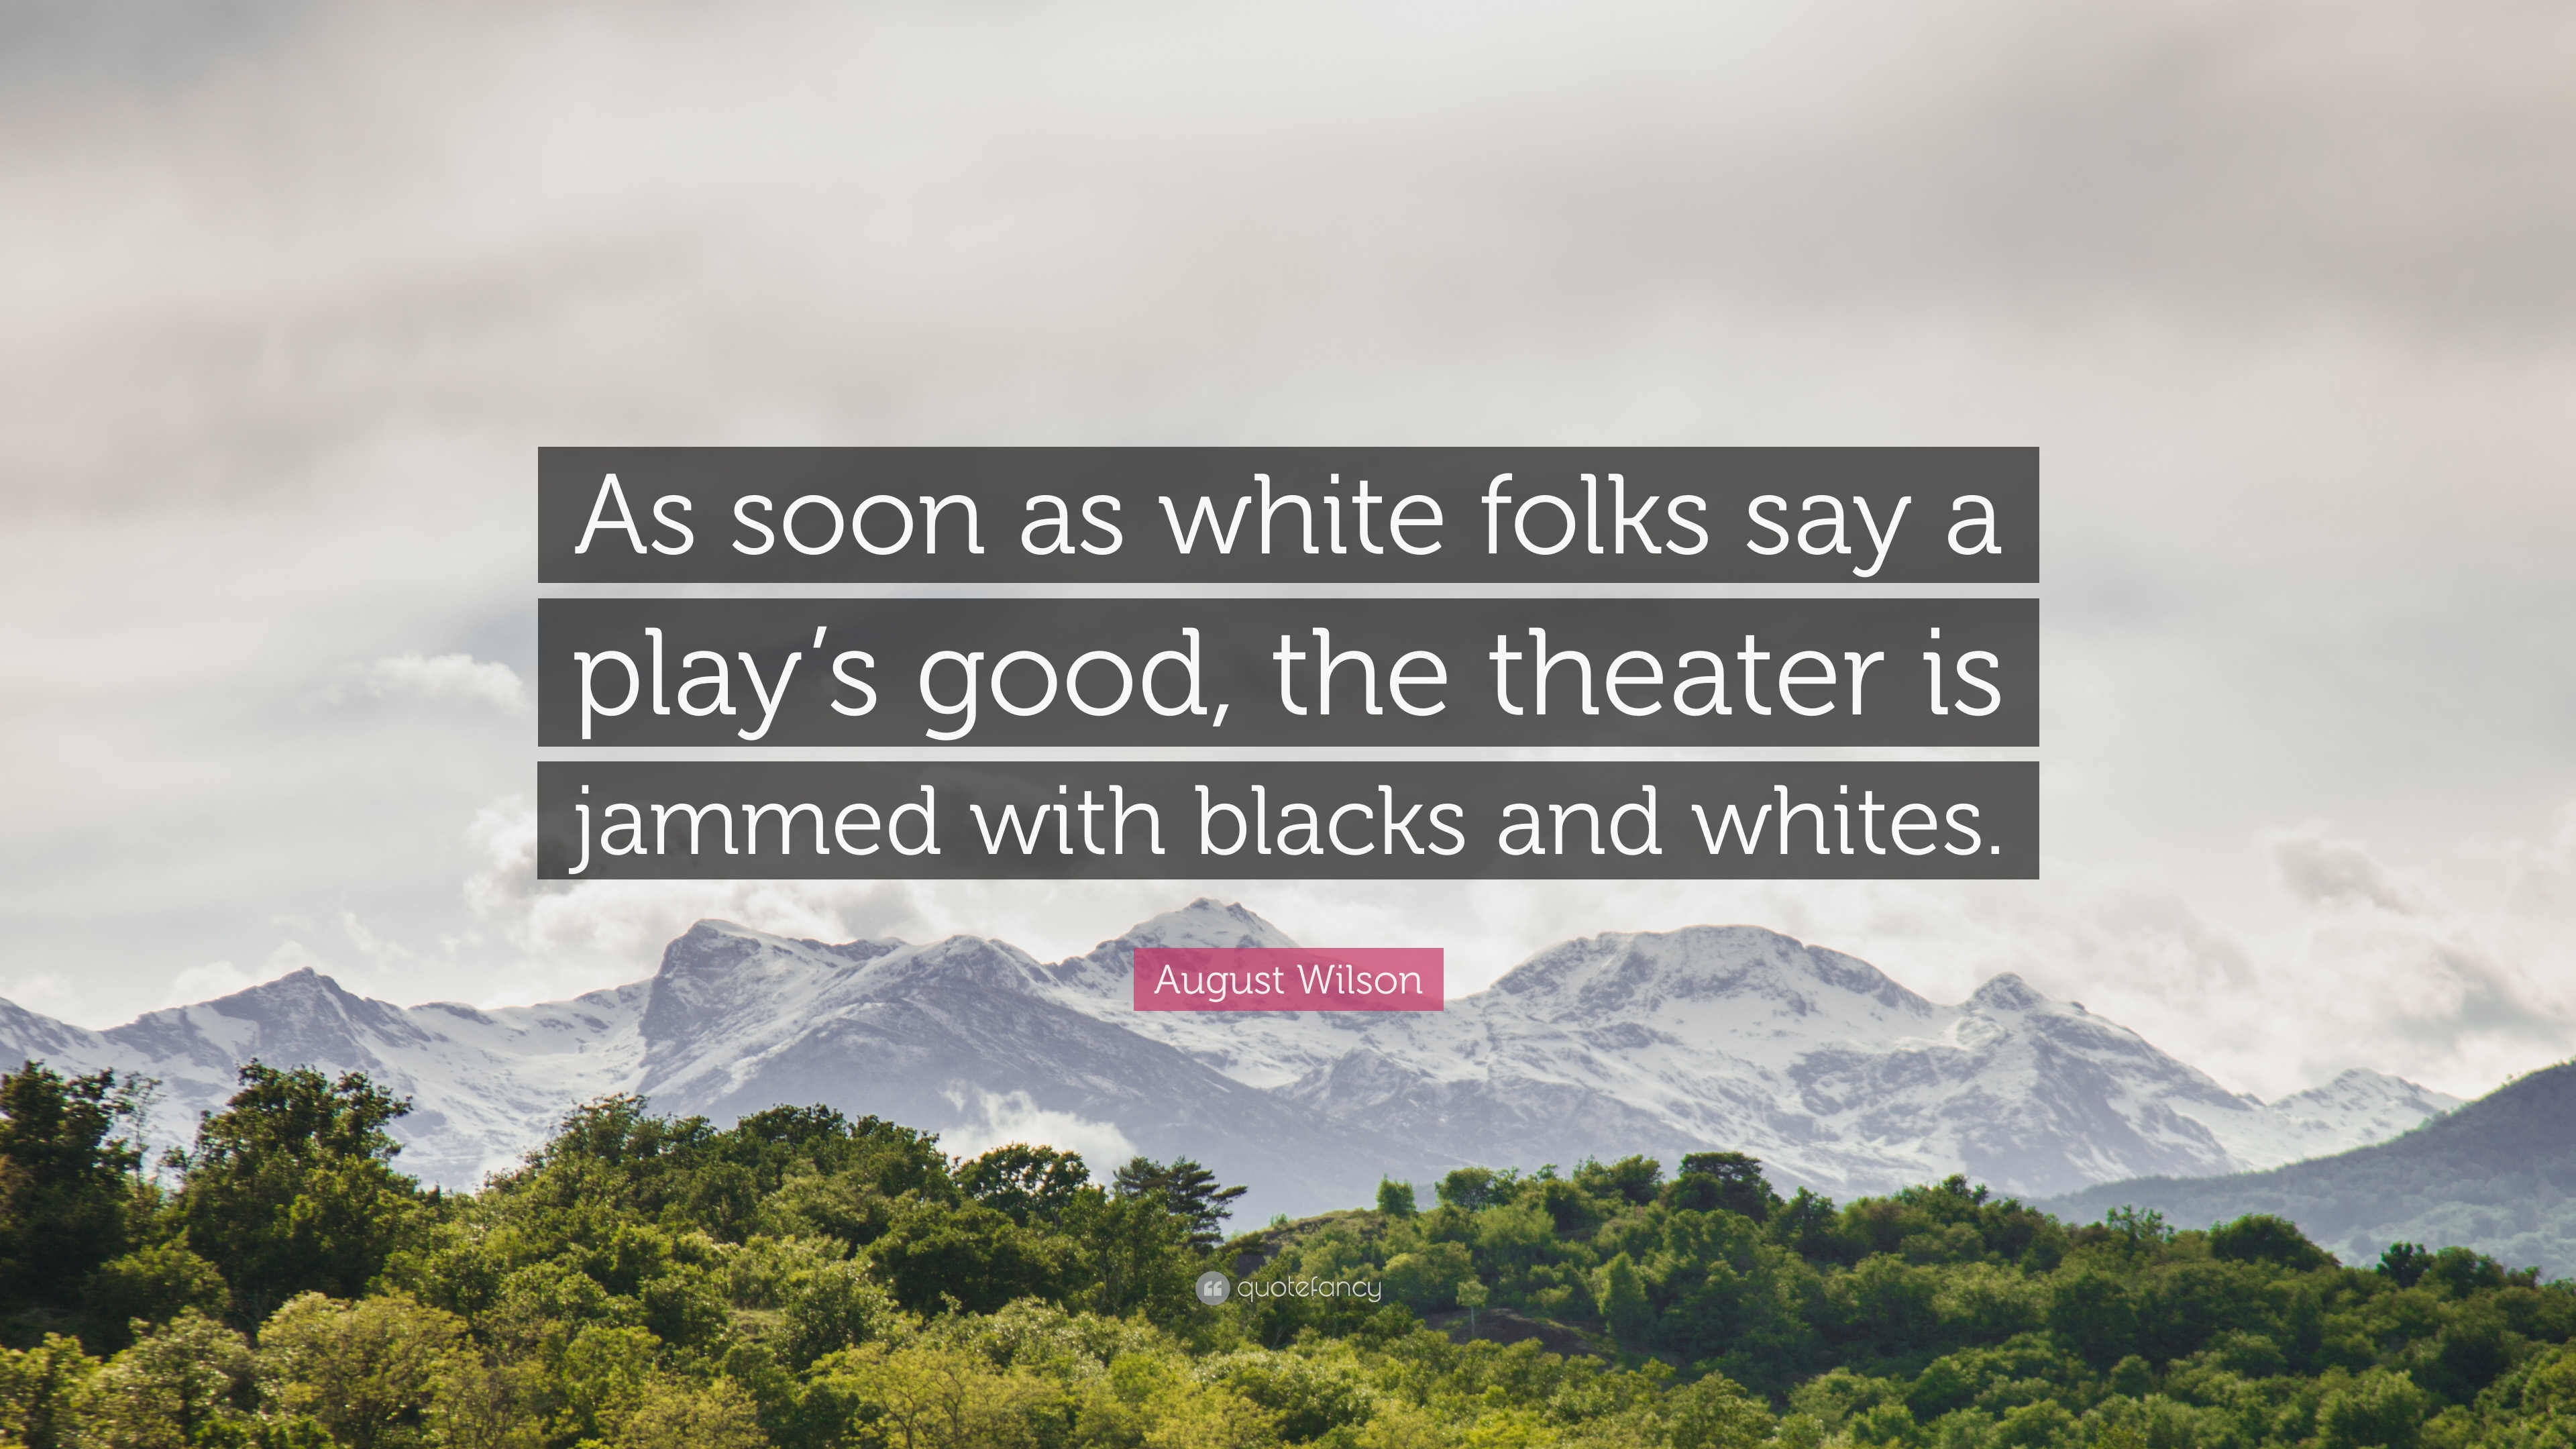 August Wilson Quote: “As soon as white folks say a play's good